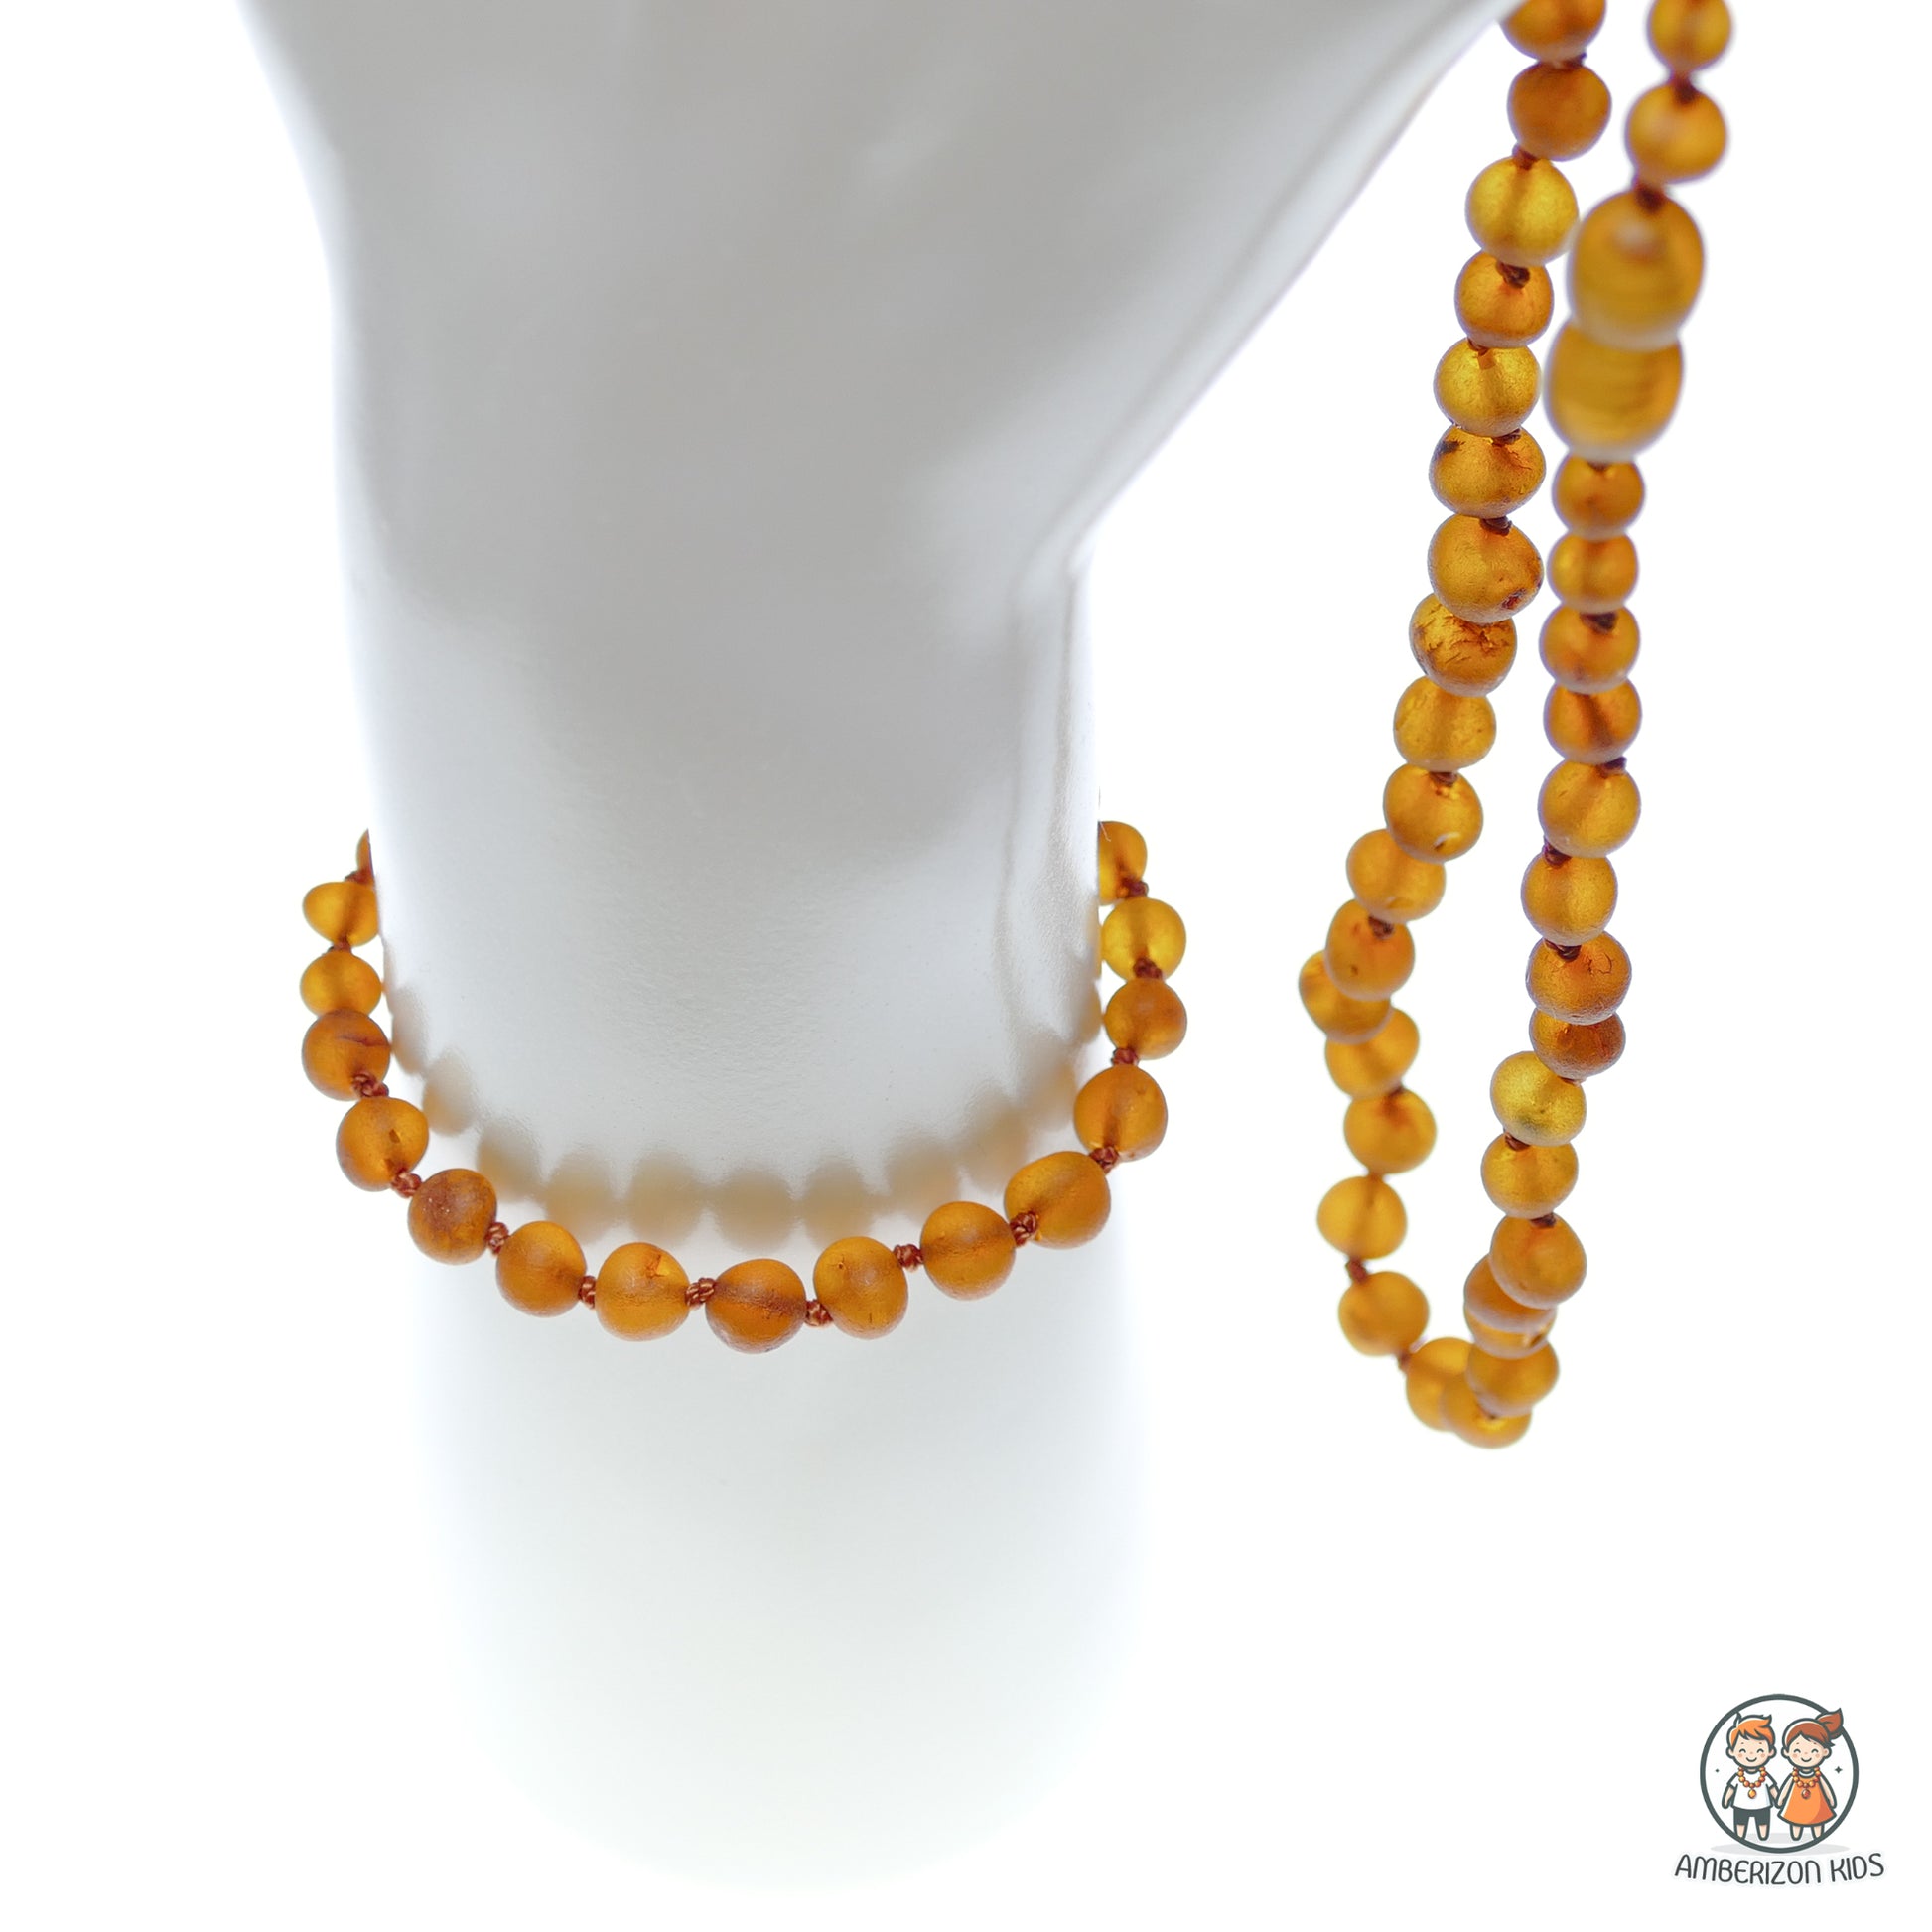 Matching Baby raw amber jewelry set - Orange/red color - Baby bracelet + baby necklace